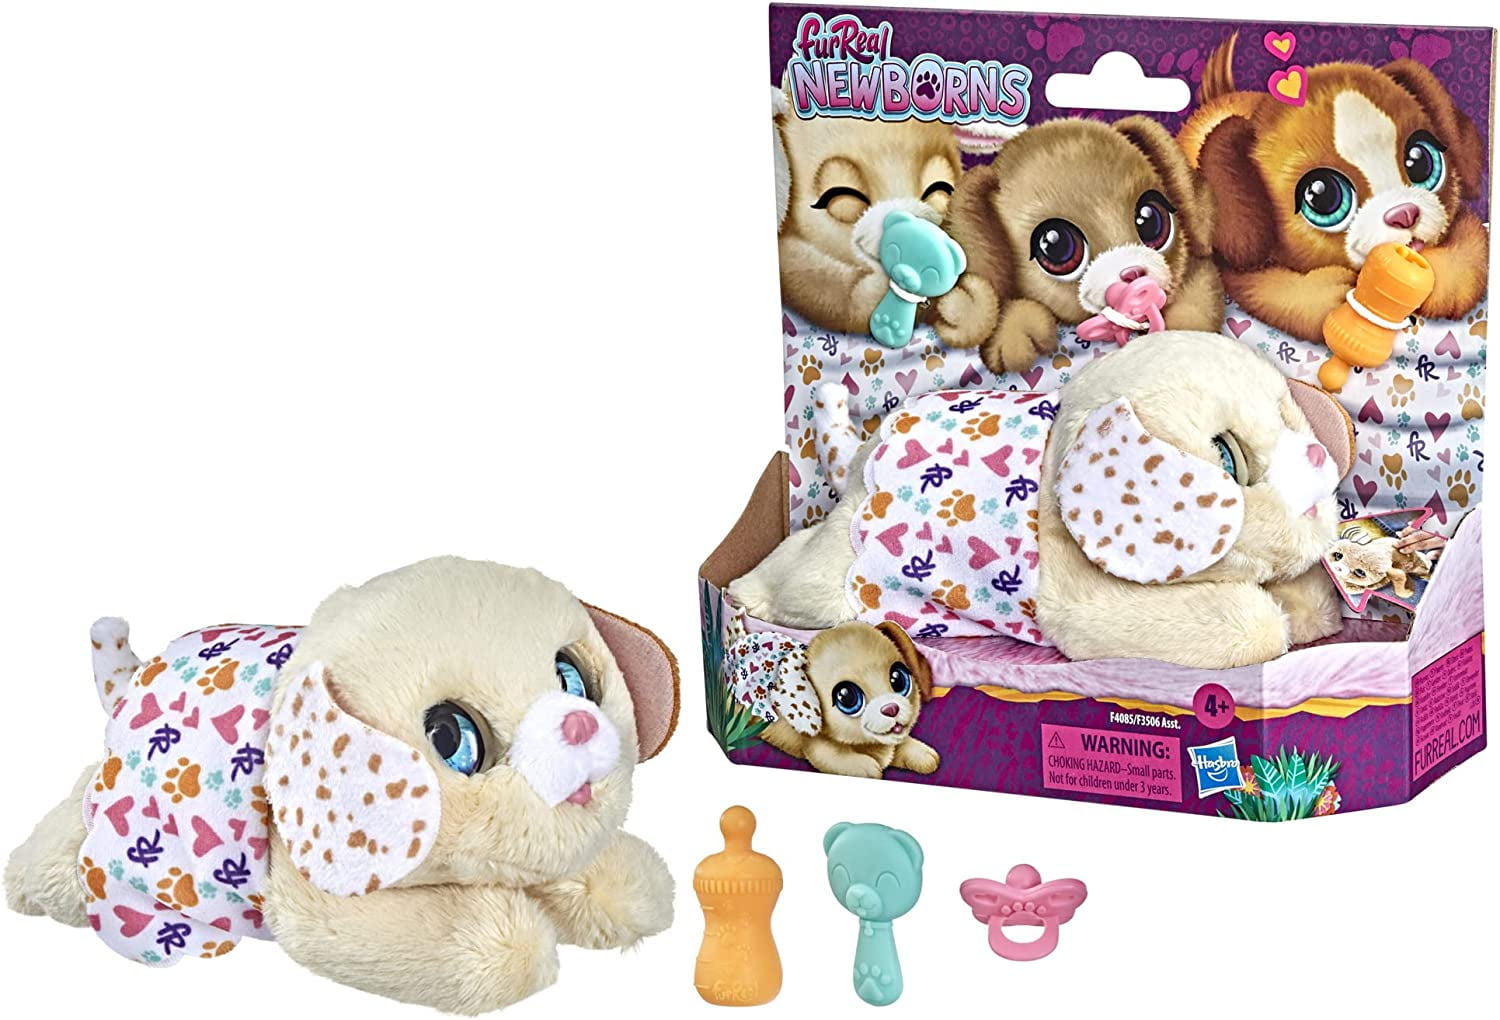 FurReal - Meet the FurReal Friends brand family of pets – engaging and  often surprising friends that can quickly become a child's favorite  companion or baby. Unlike other plush pets, FurReal Friends